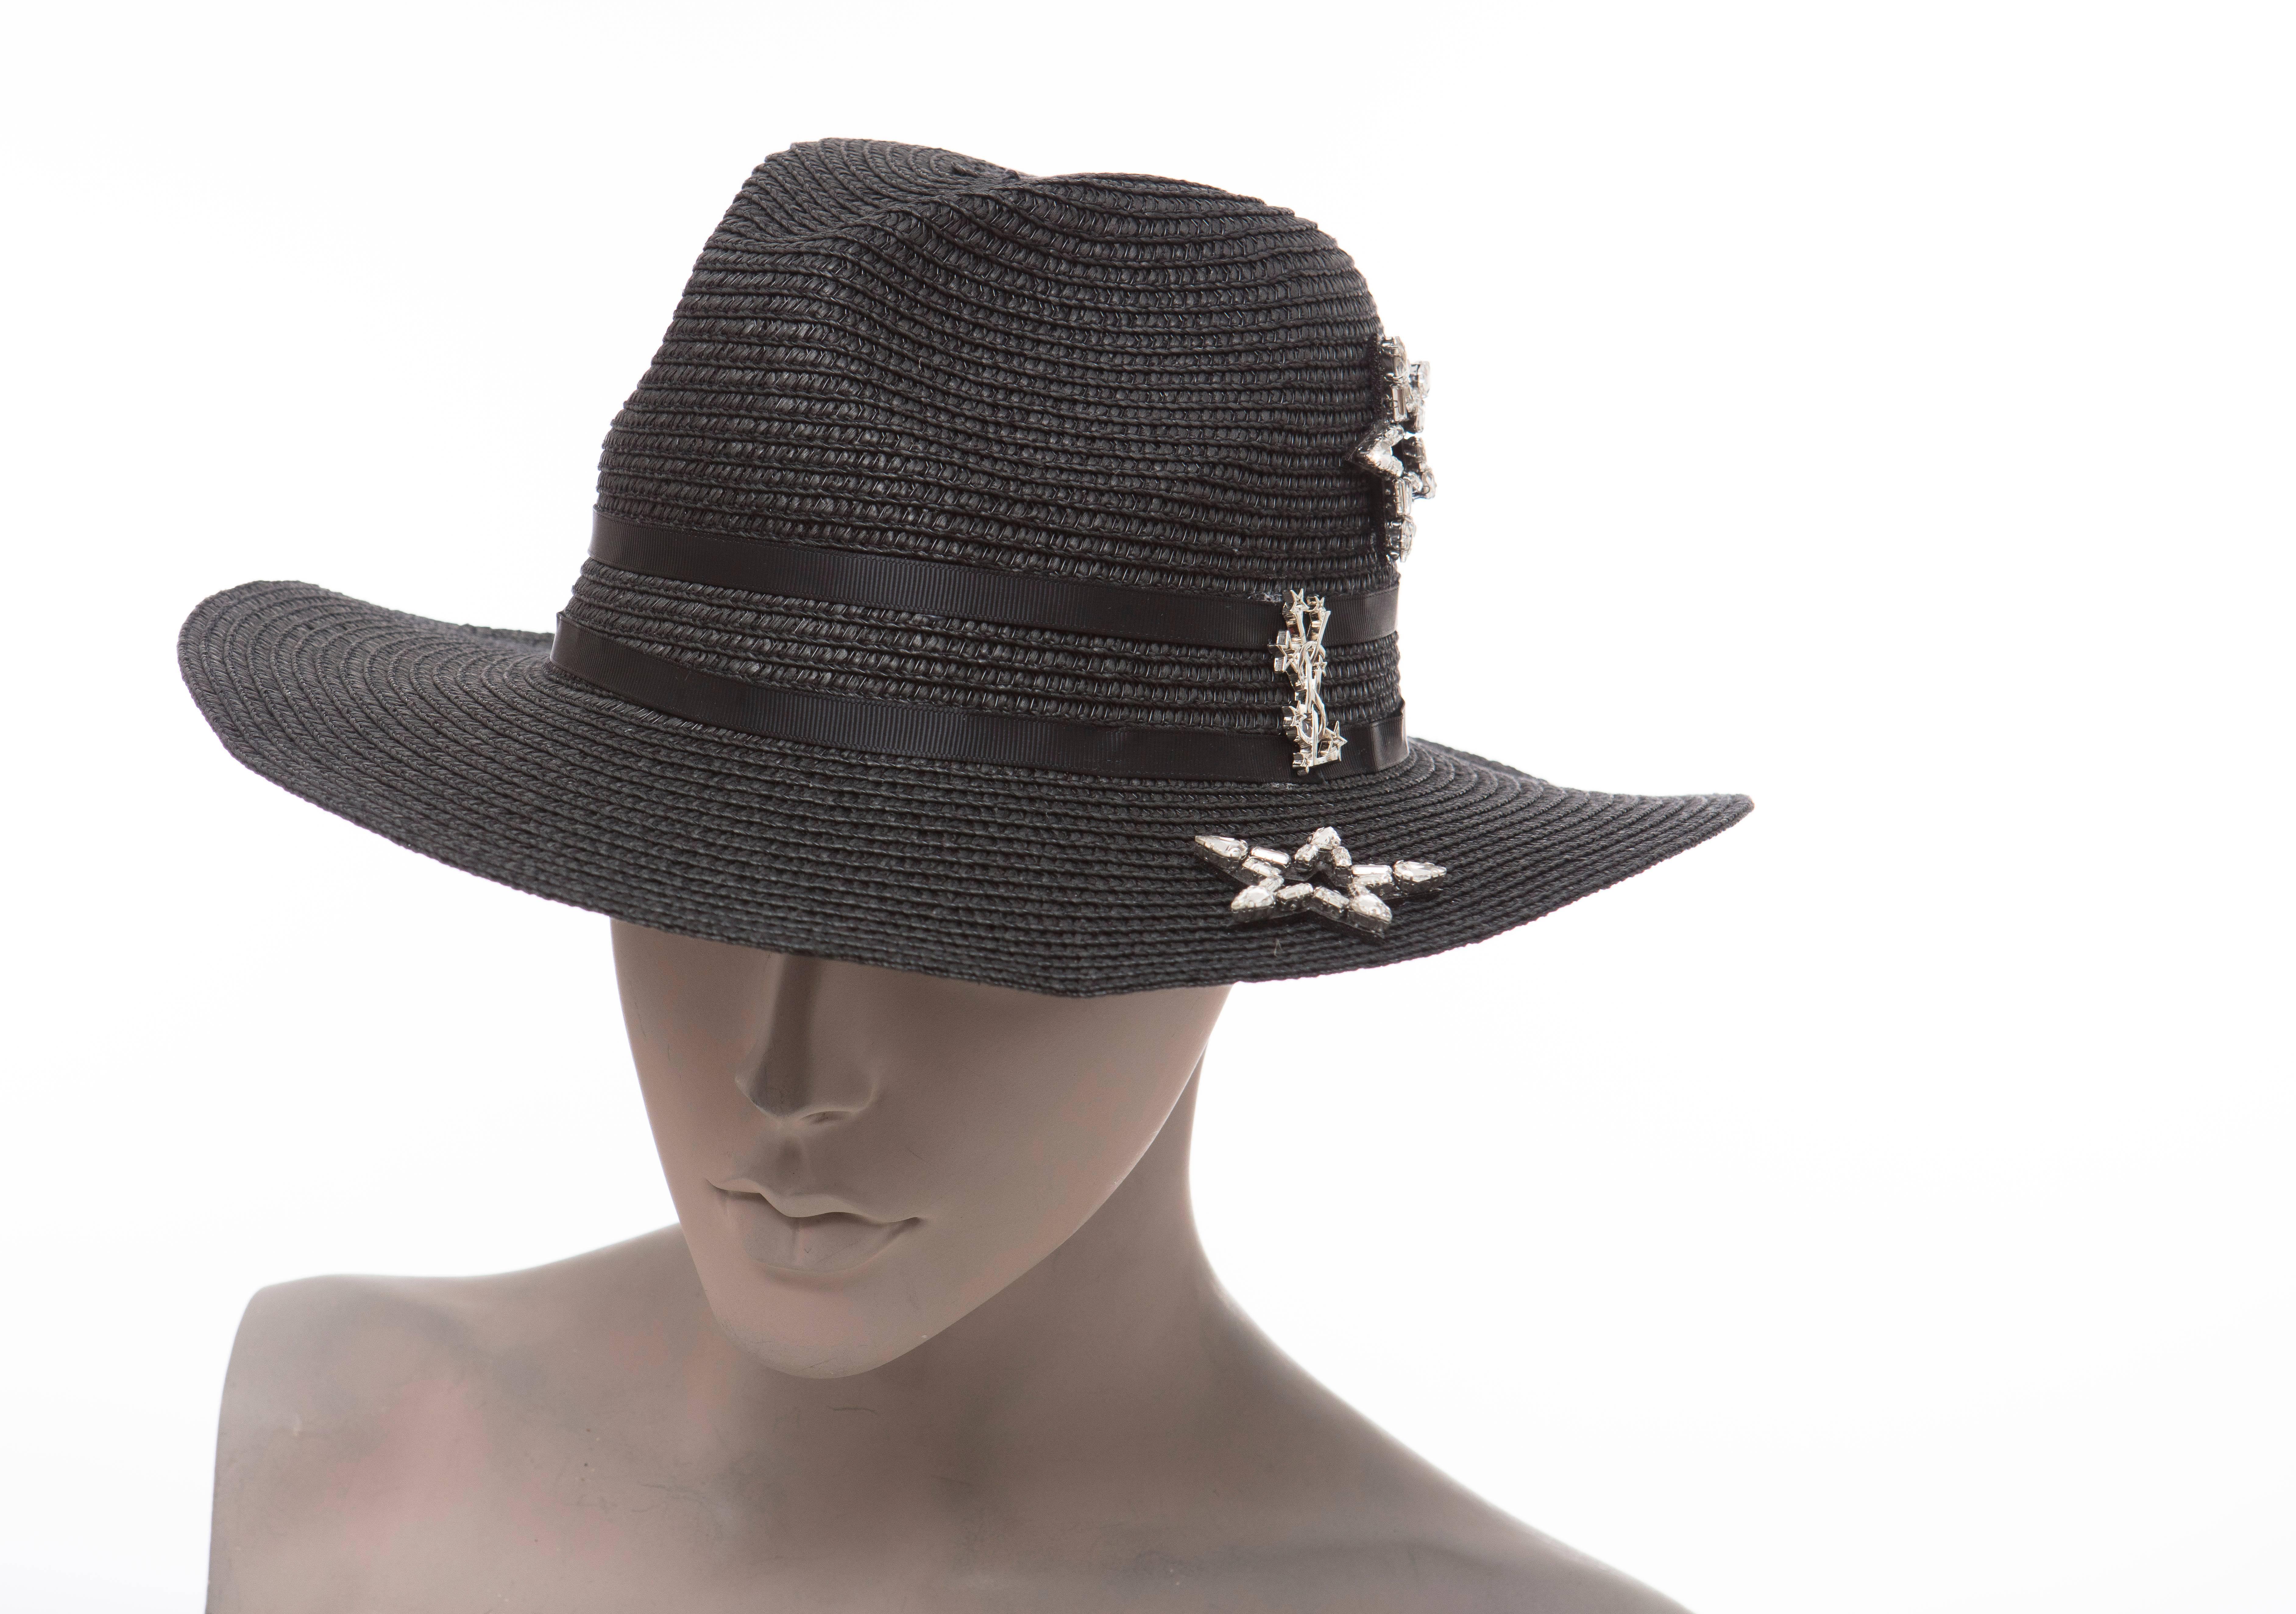 Yves Saint Laurent black straw hat with crystal embellished star featuring logo accents throughout and black grosgrain trim.

Circumference: 23.25, Brim 2.75
